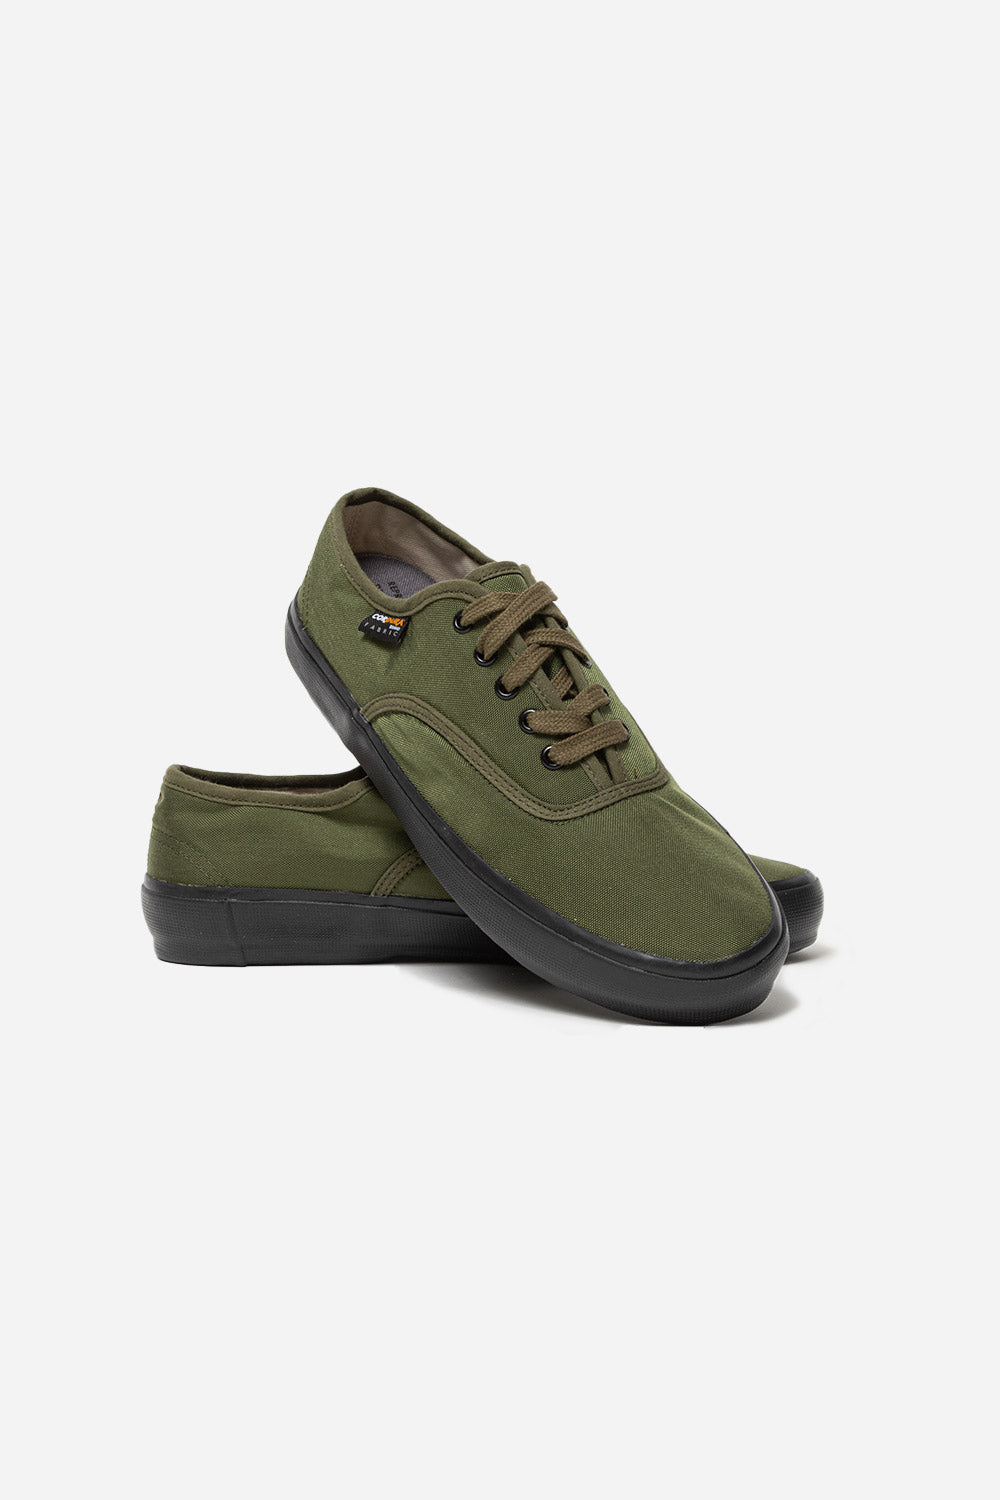 reproduction-of-found-us-navy-military-olive-black-sole